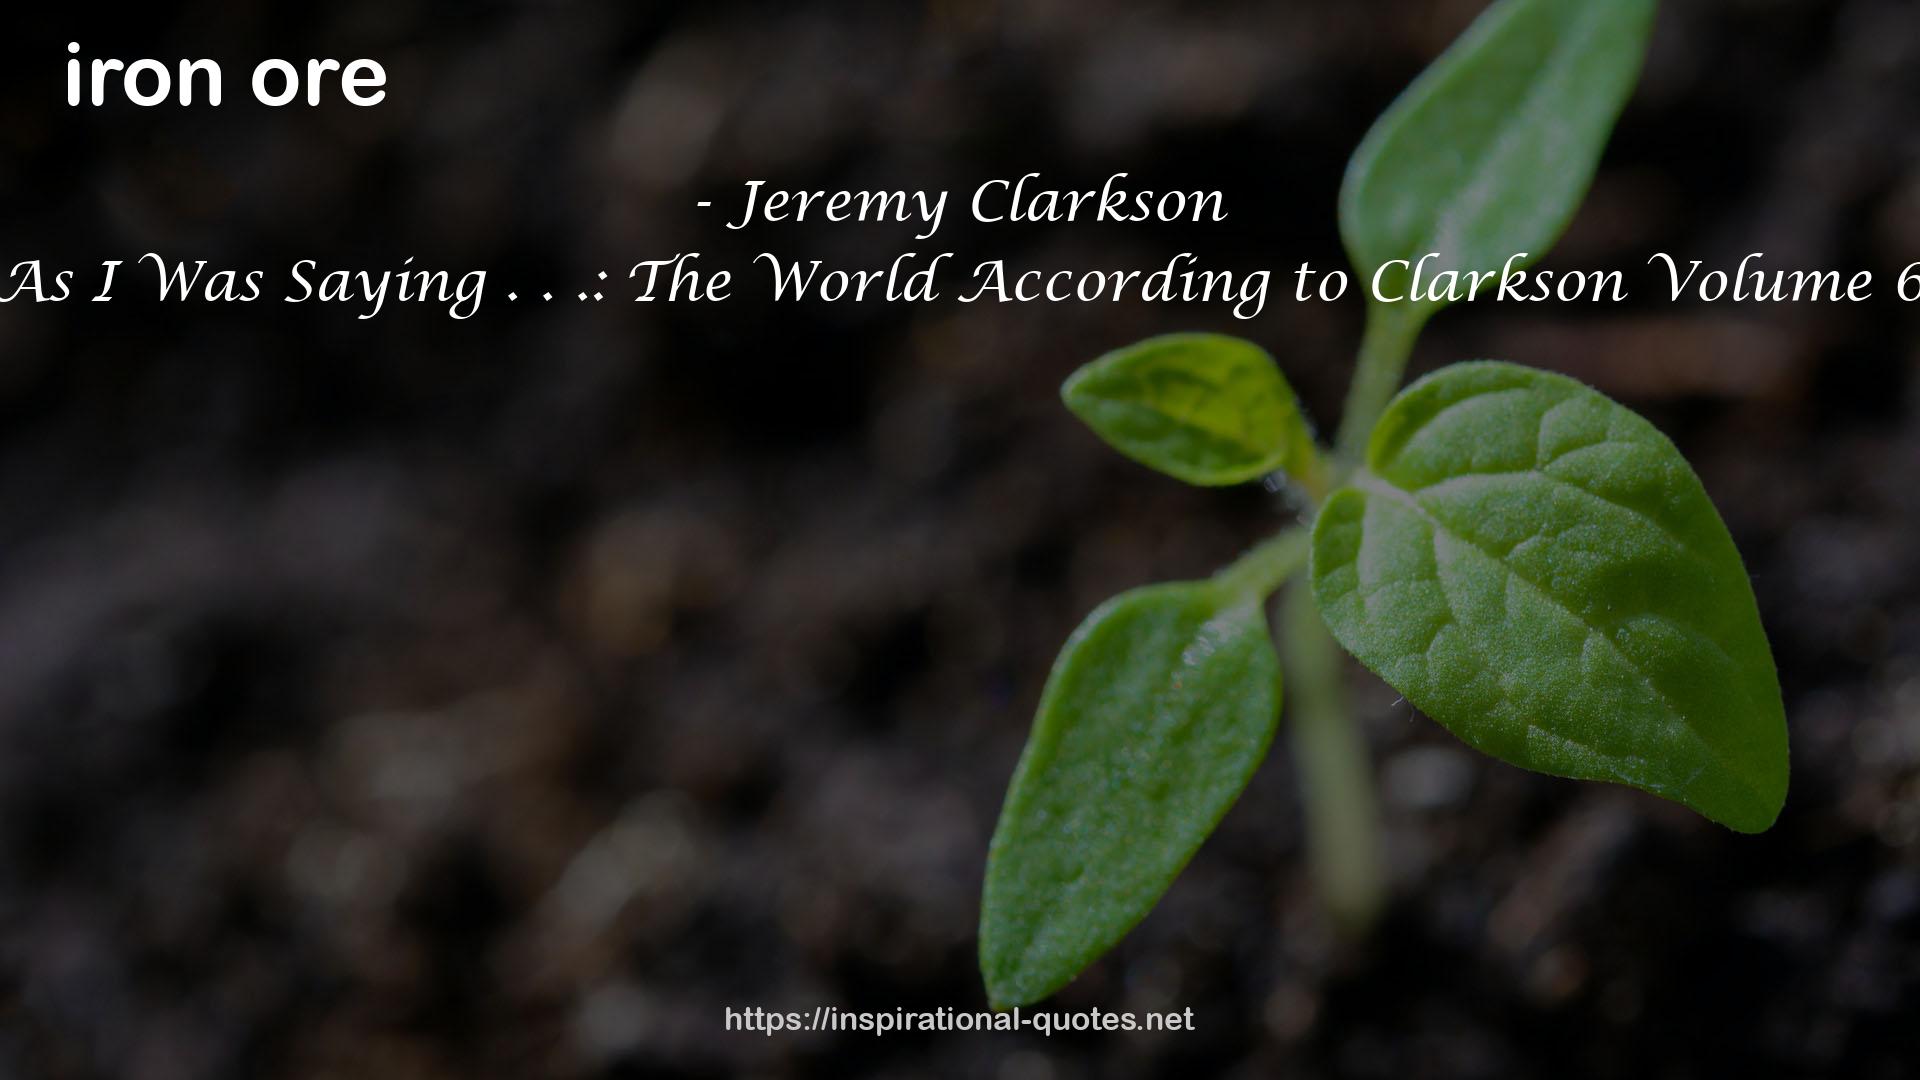 As I Was Saying . . .: The World According to Clarkson Volume 6 QUOTES